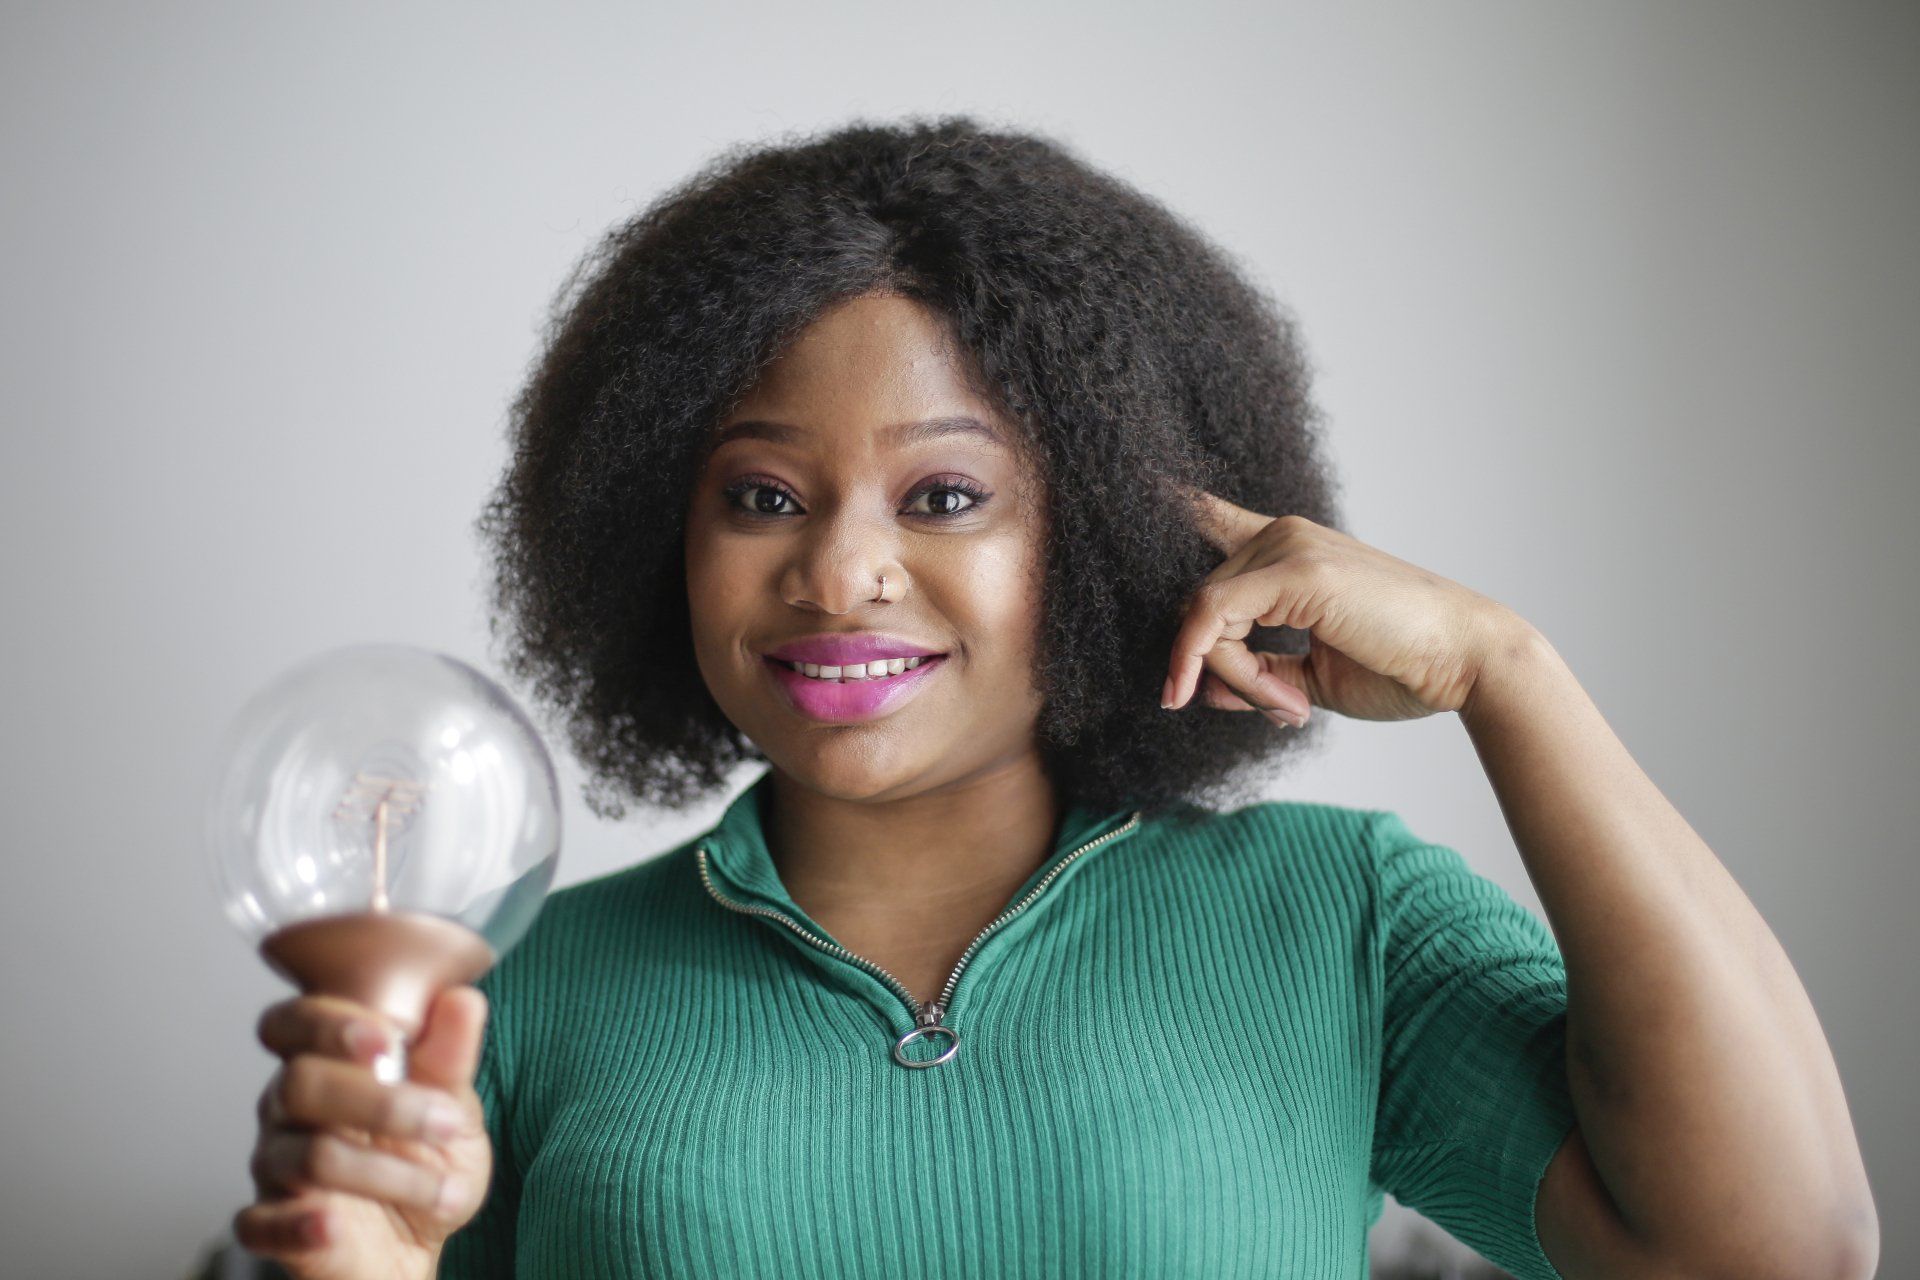 a woman in a green shirt is holding a light bulb in her hand representing ideas pointing to her brain as she gets ideas from Brainspotting and using Bilateral music